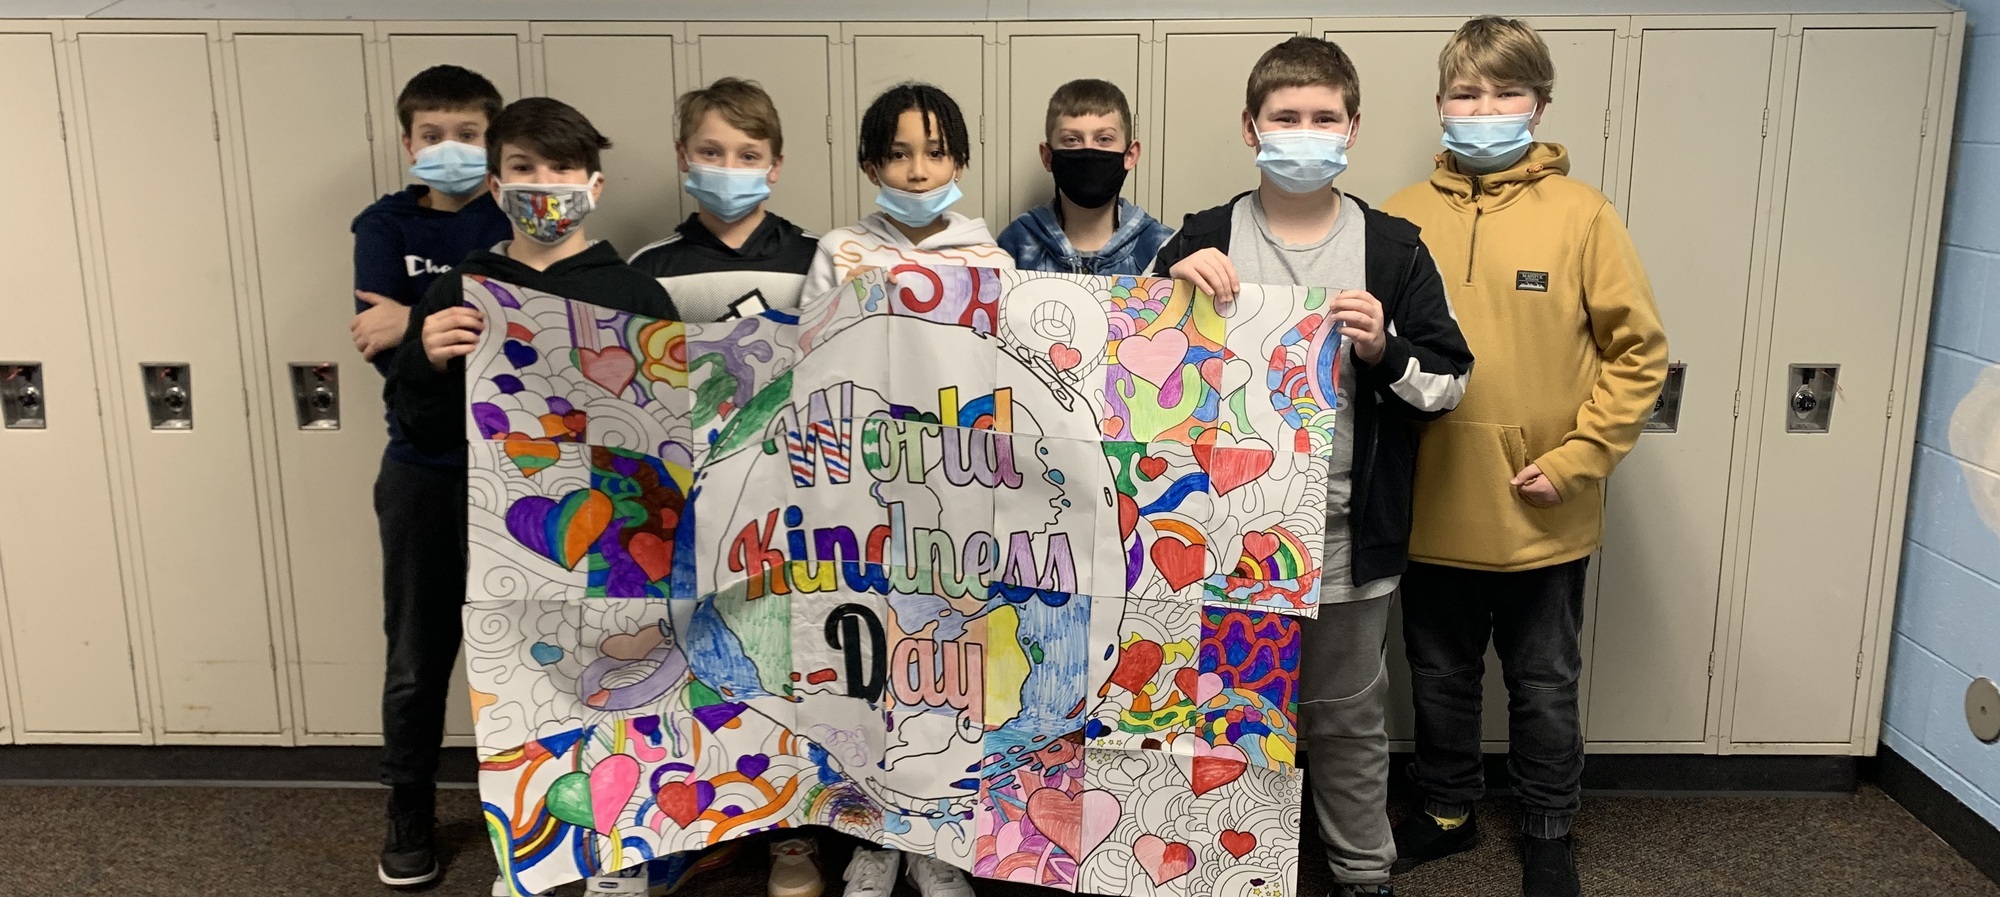 Students with a World Kindness Day banner